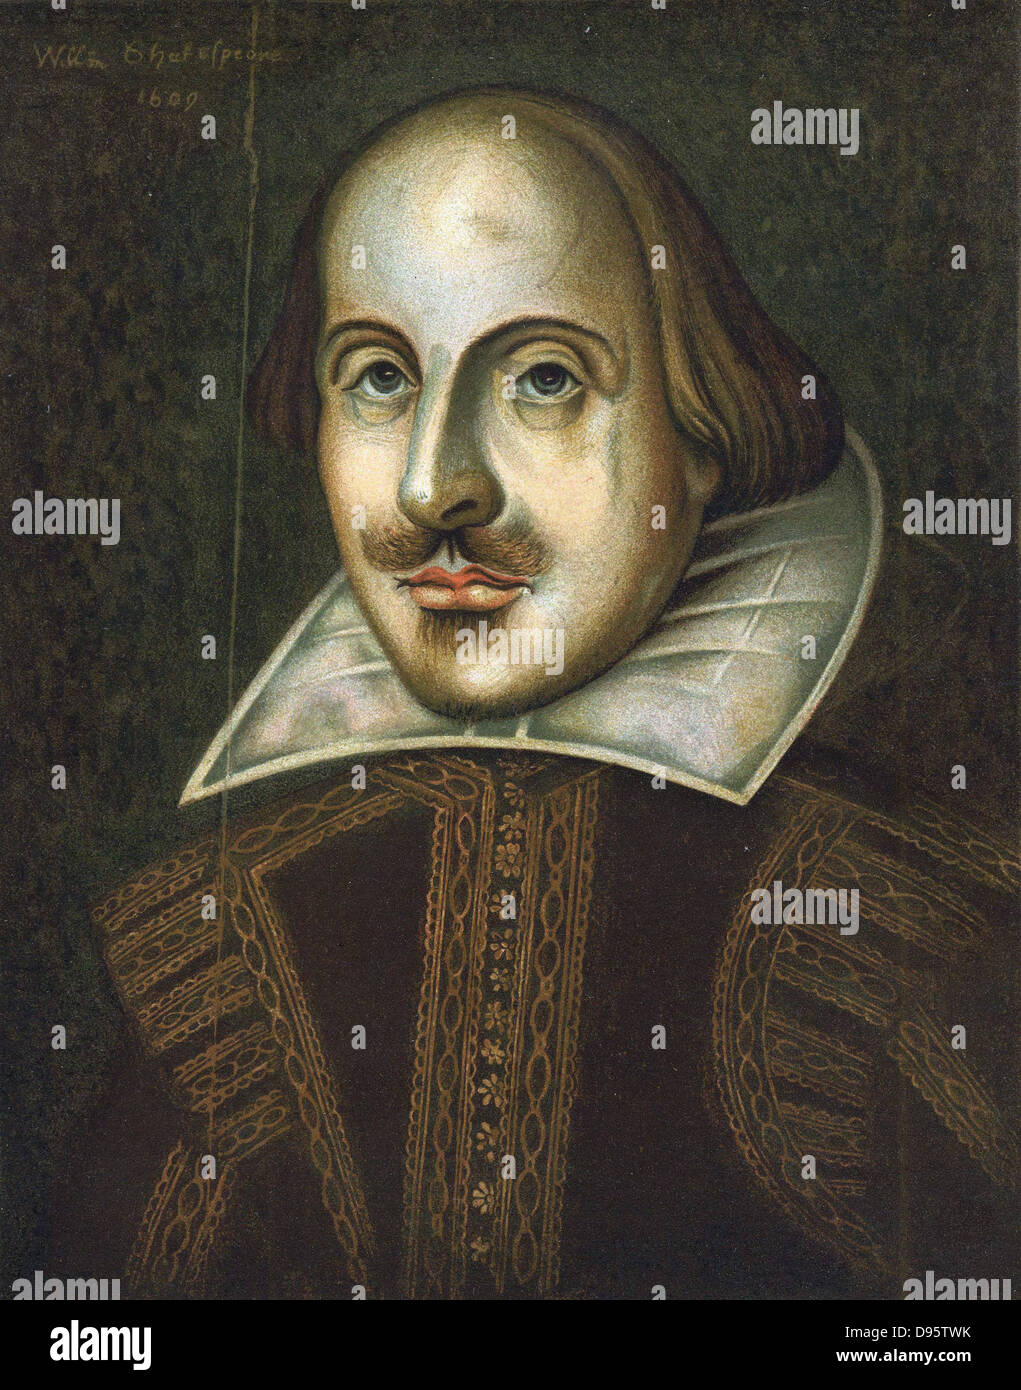 William Shakespeare (1564-1616) English playwright. Anonymous portrait in oils dated 1609. This is the portrait engraved by Droeshout for the First Folio of 1623 Stock Photo